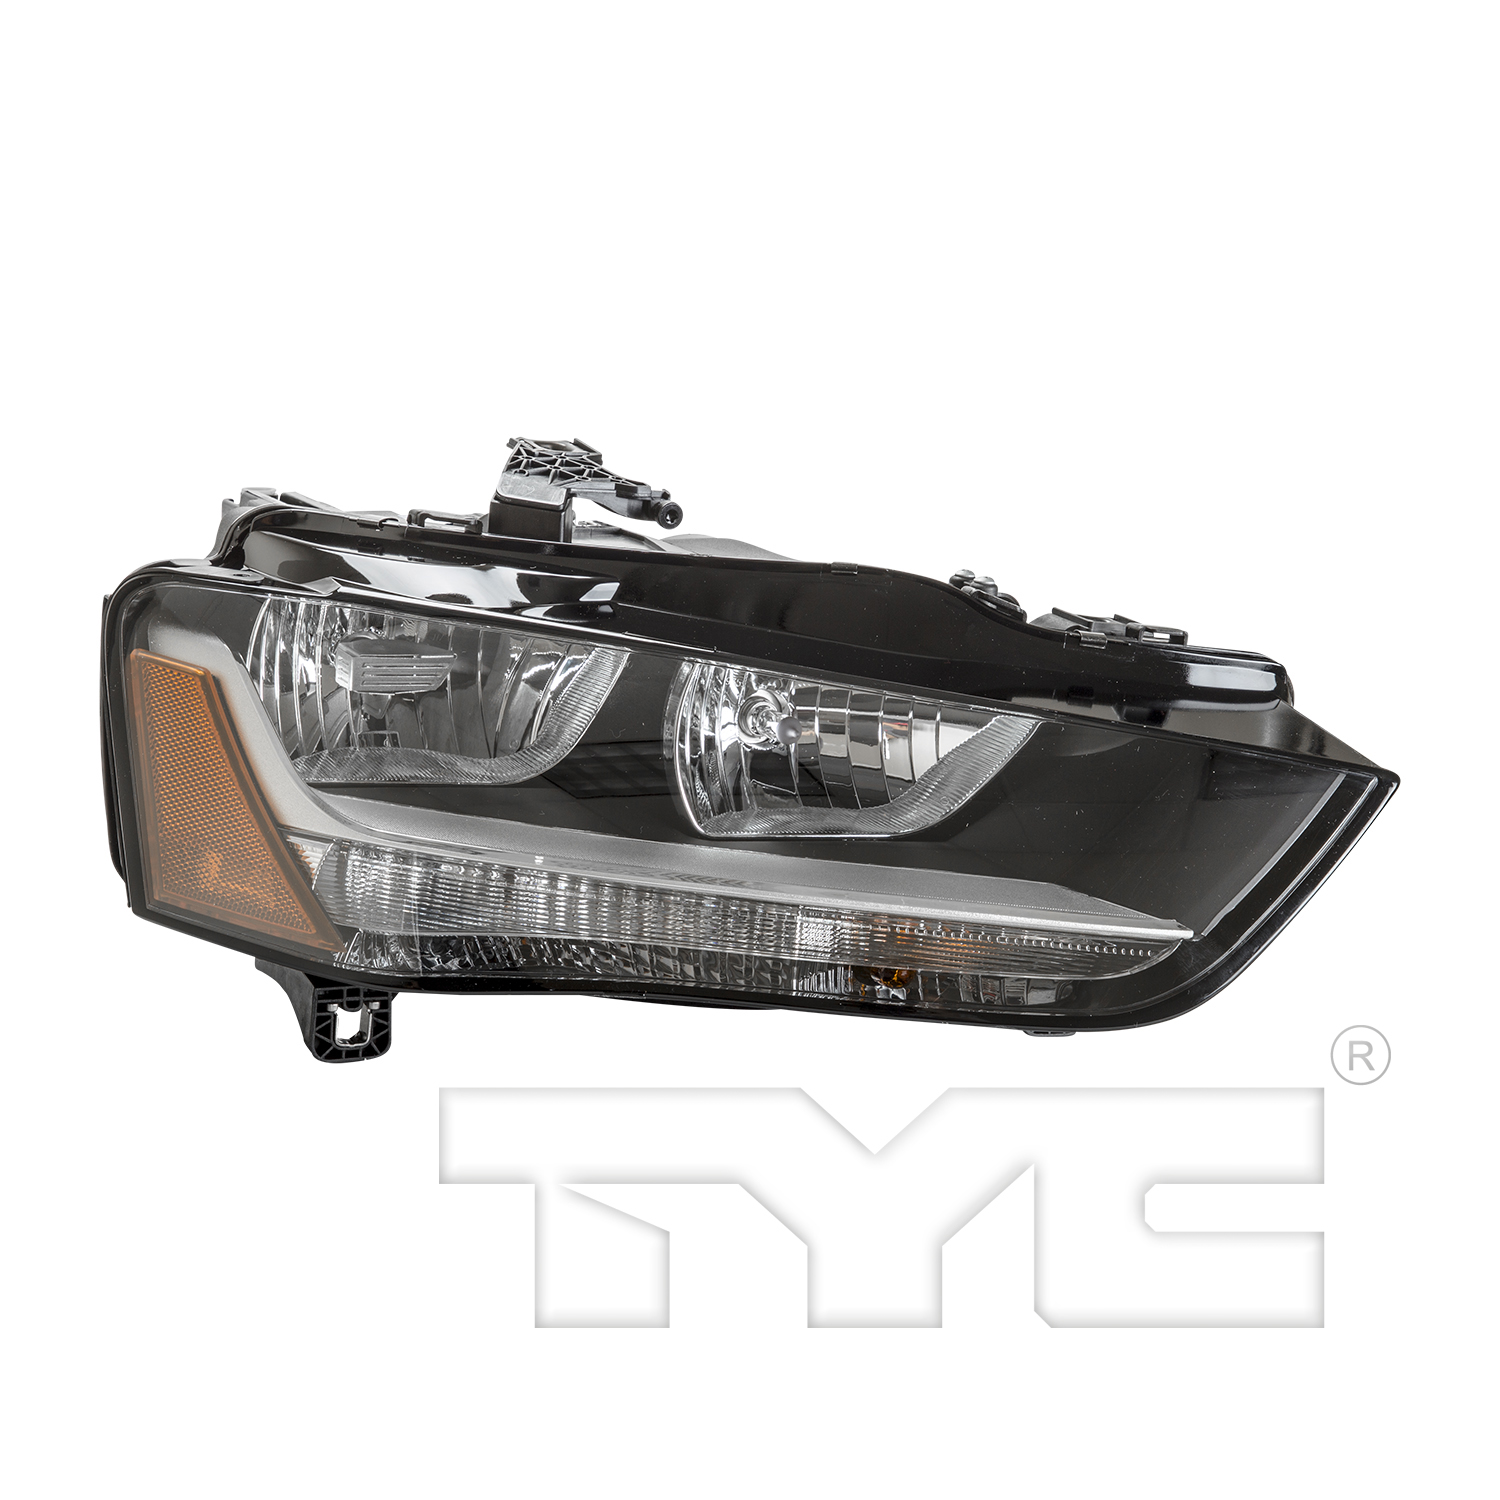 Aftermarket HEADLIGHTS for AUDI - S4, S4,12-16,RT Headlamp assy composite